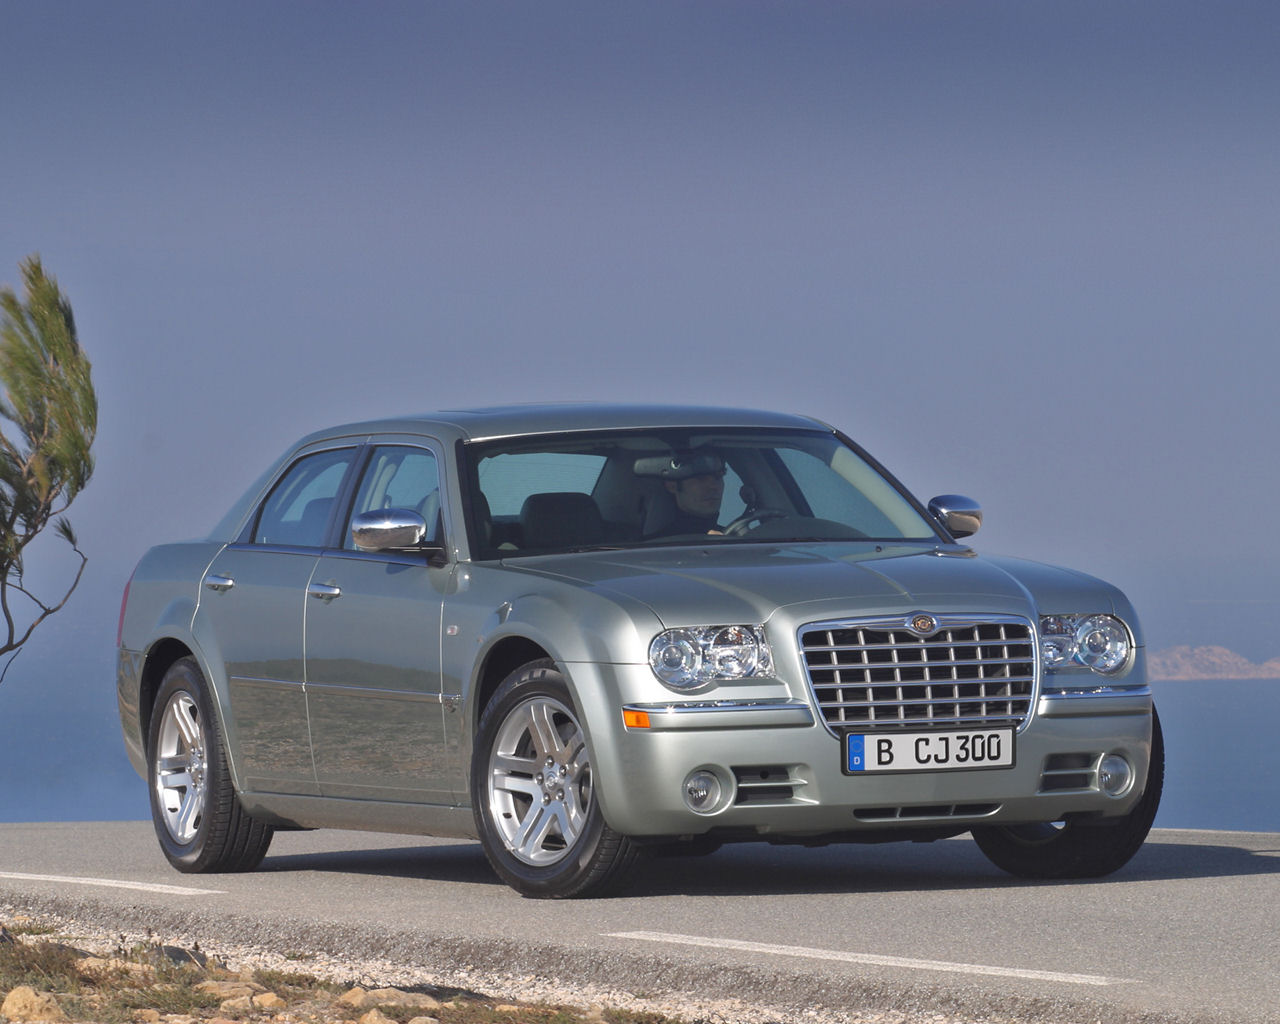 Pros and cons about chrysler 300 #2